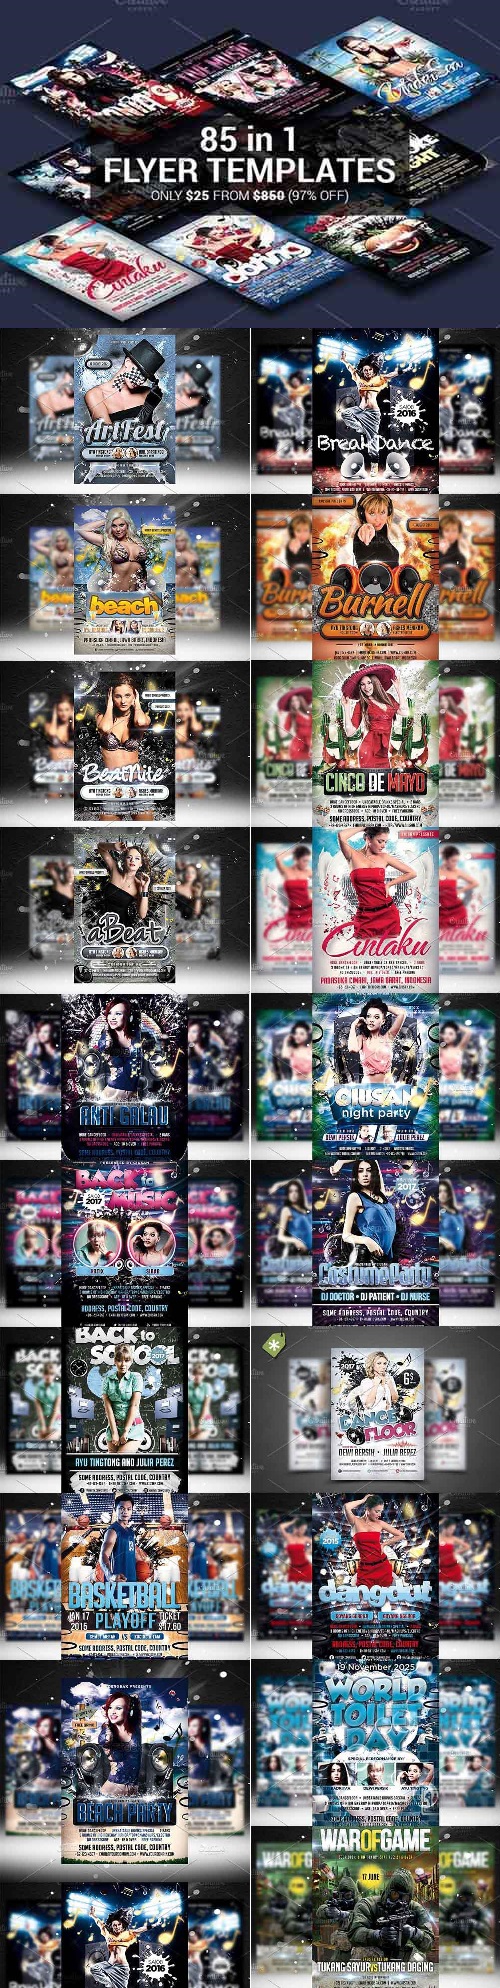 85 in 1 Flyer Templates 1831572